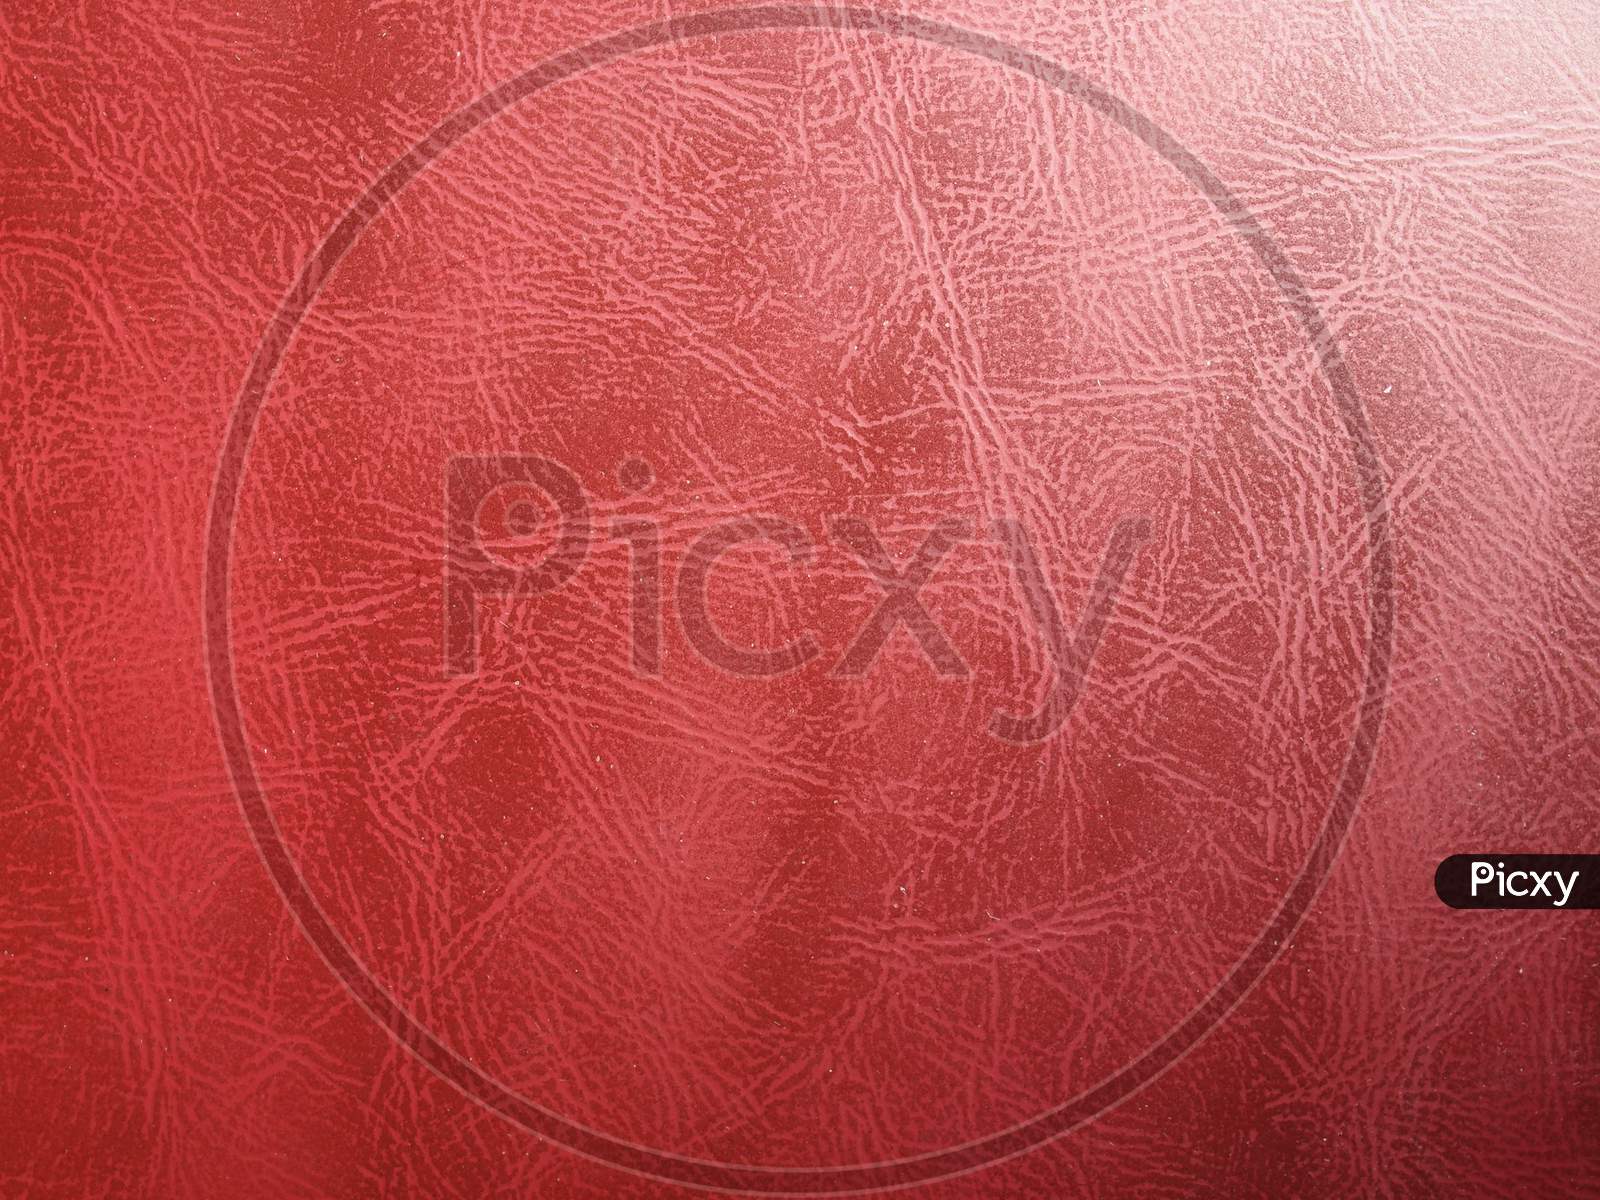 Red Leatherette Faux Leather Texture Background